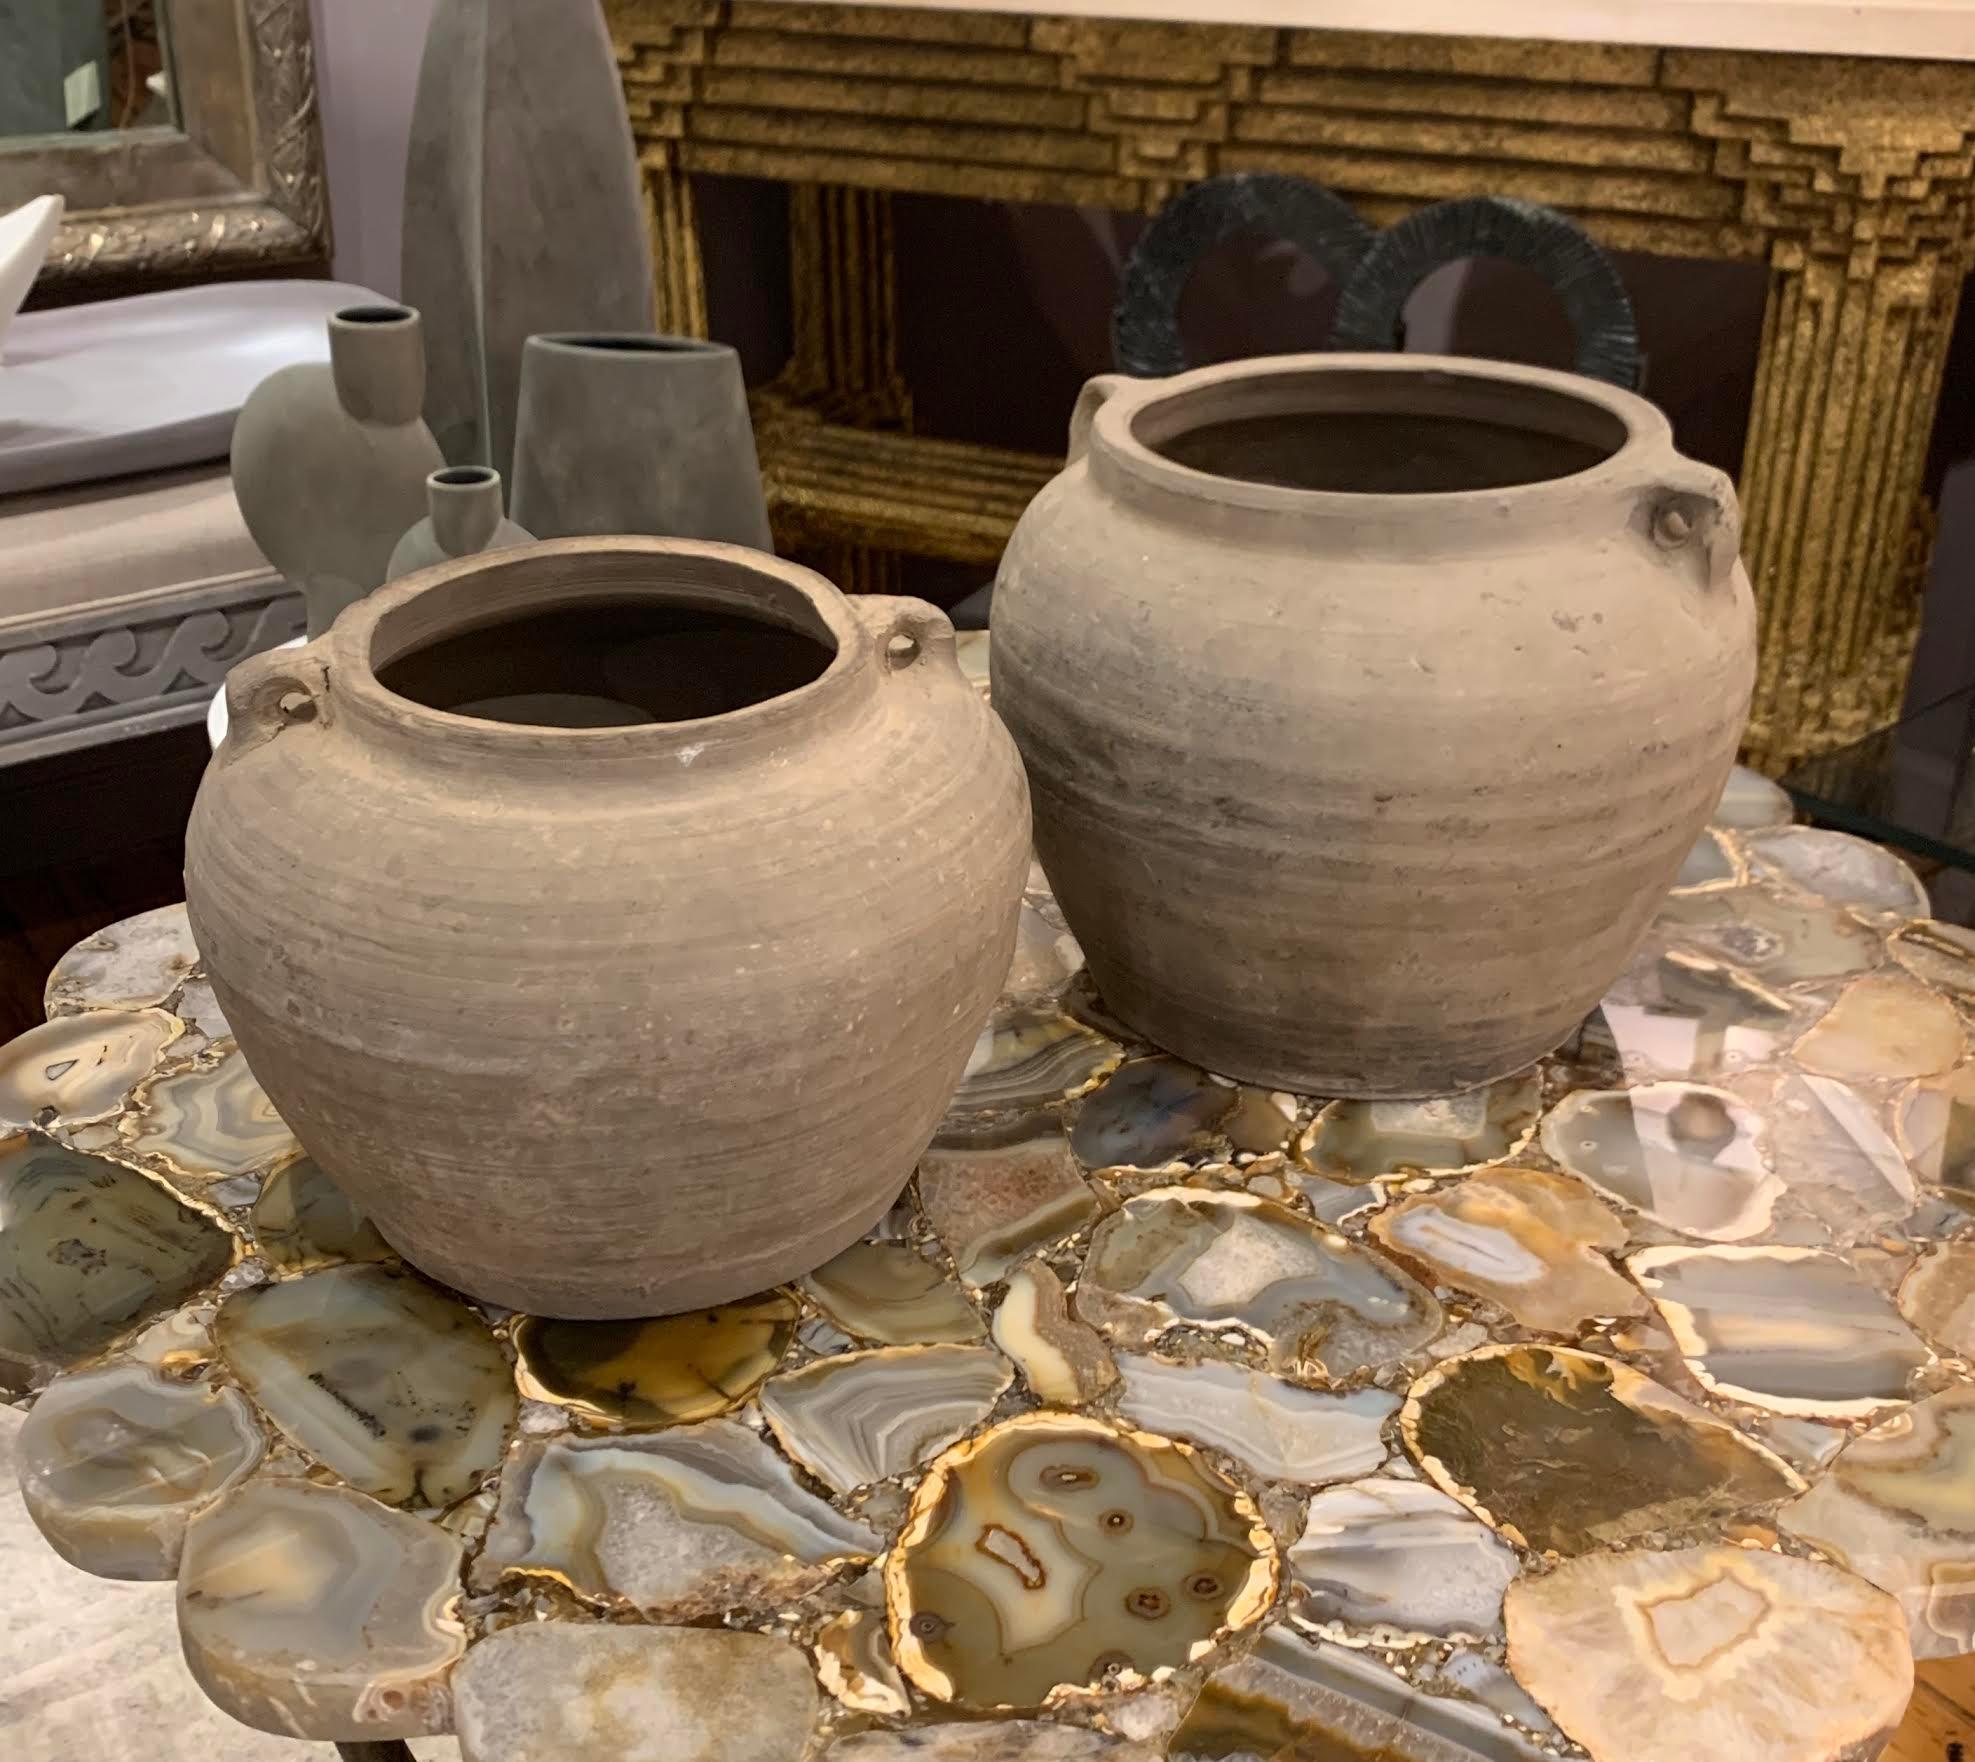 1940s Chinese collection of natural weathered patina terra cotta pots.
Two handled.
Horizontal ribbed and textured details.
Originally used to store and transport grains.
Sold individually
Sizes range 9.5